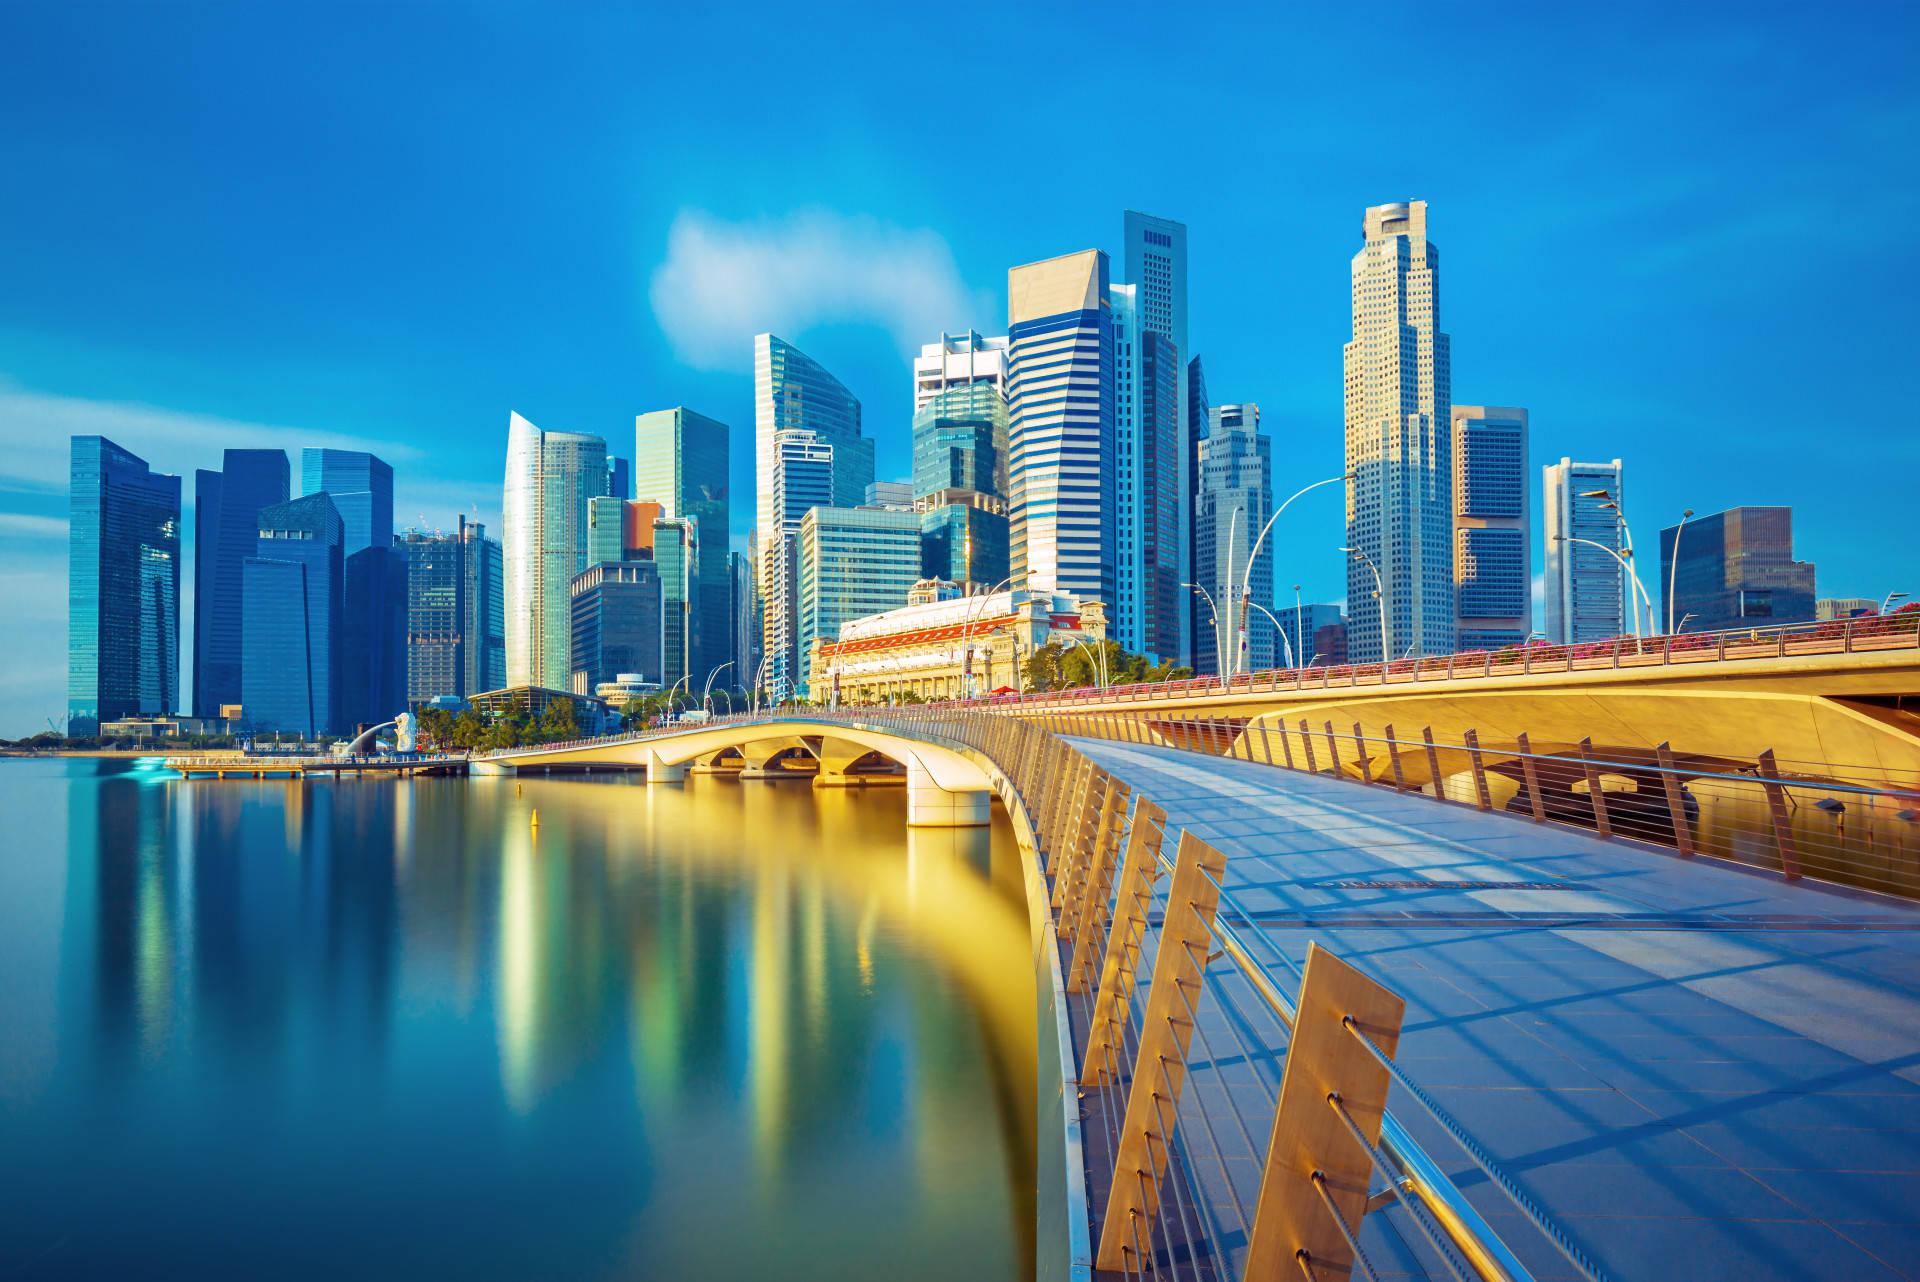 Because it is so flat, Singapore is considered one of the most accessible cities on the planet.<p><a href="https://www.msn.com/en-us/community/channel/vid-7xx8mnucu55yw63we9va2gwr7uihbxwc68fxqp25x6tg4ftibpra?cvid=94631541bc0f4f89bfd59158d696ad7e">Follow us and access great exclusive content every day</a></p>